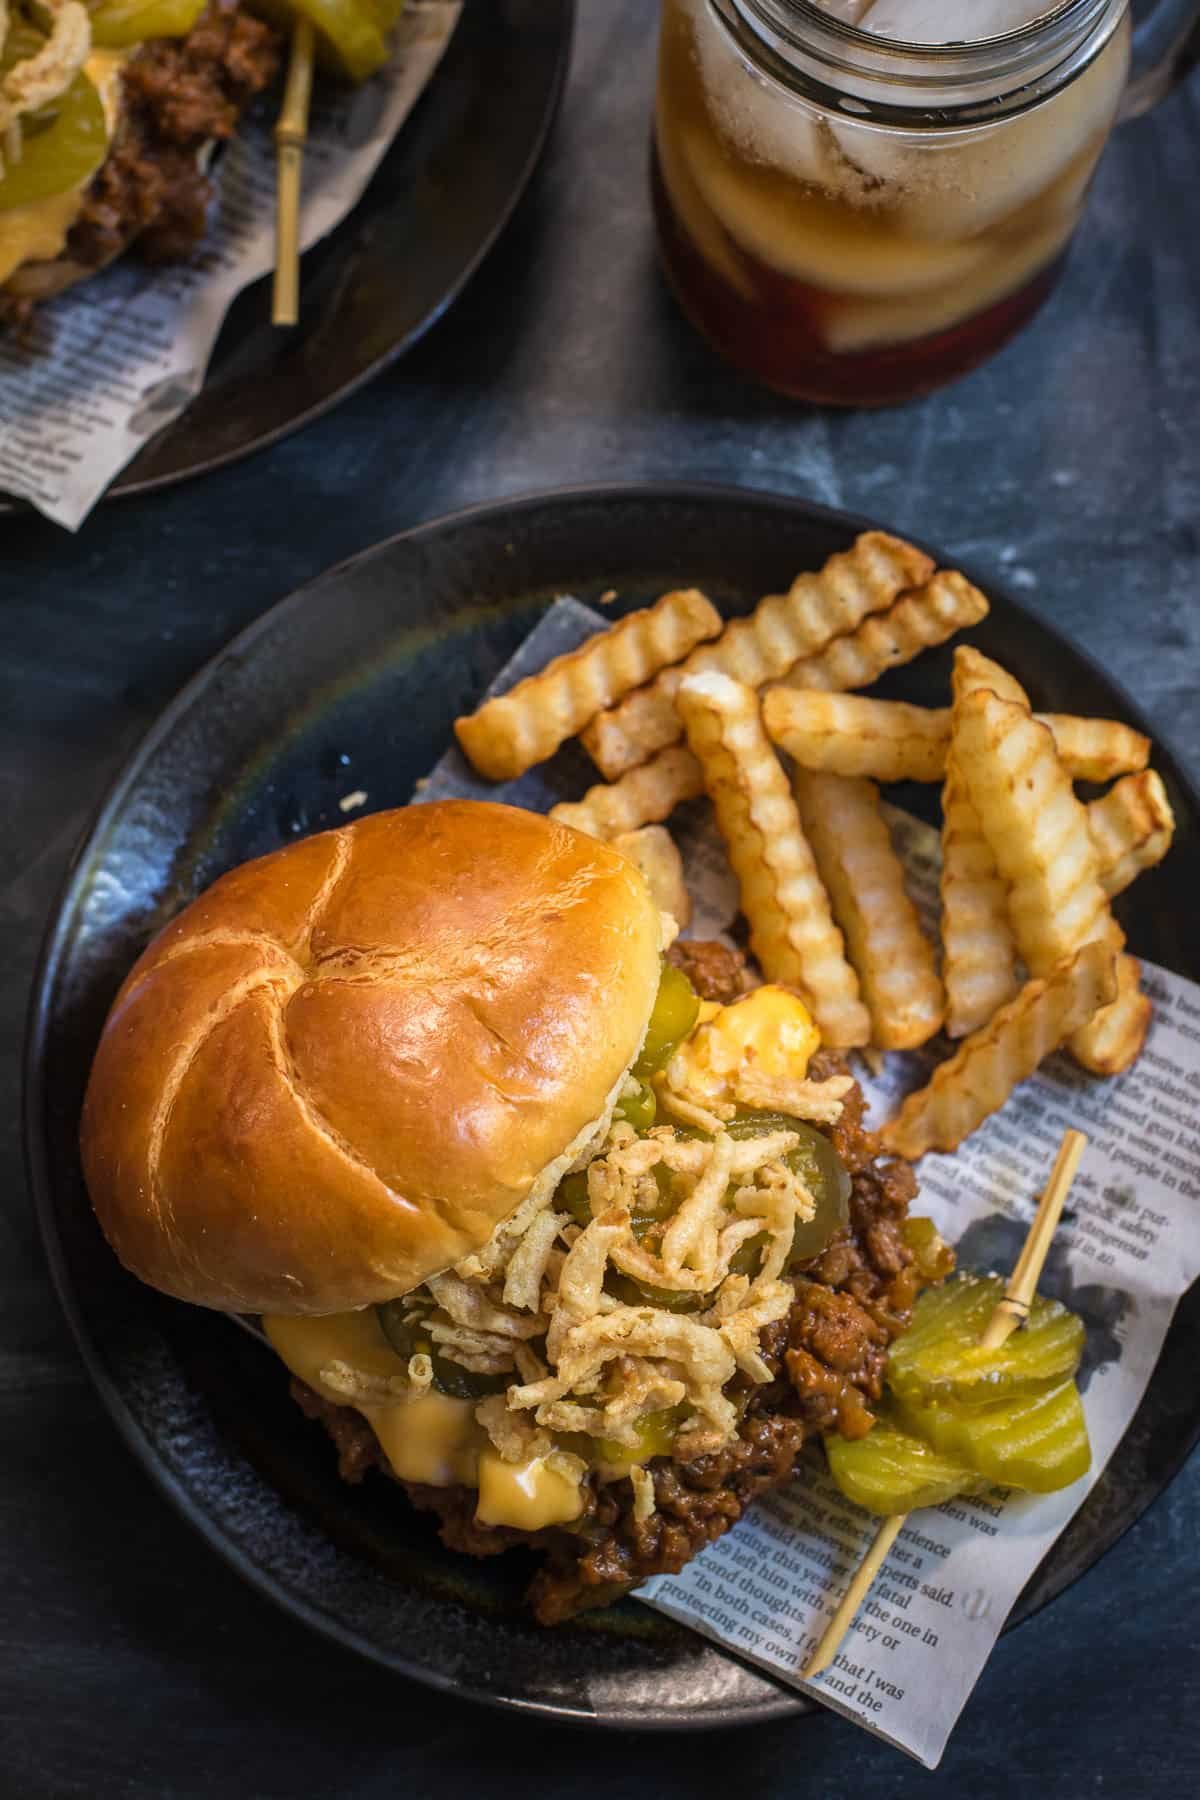 Plate with a homemade sloppy joe sandwich, crinkle cut fries, and pickles speared on a toothpick.